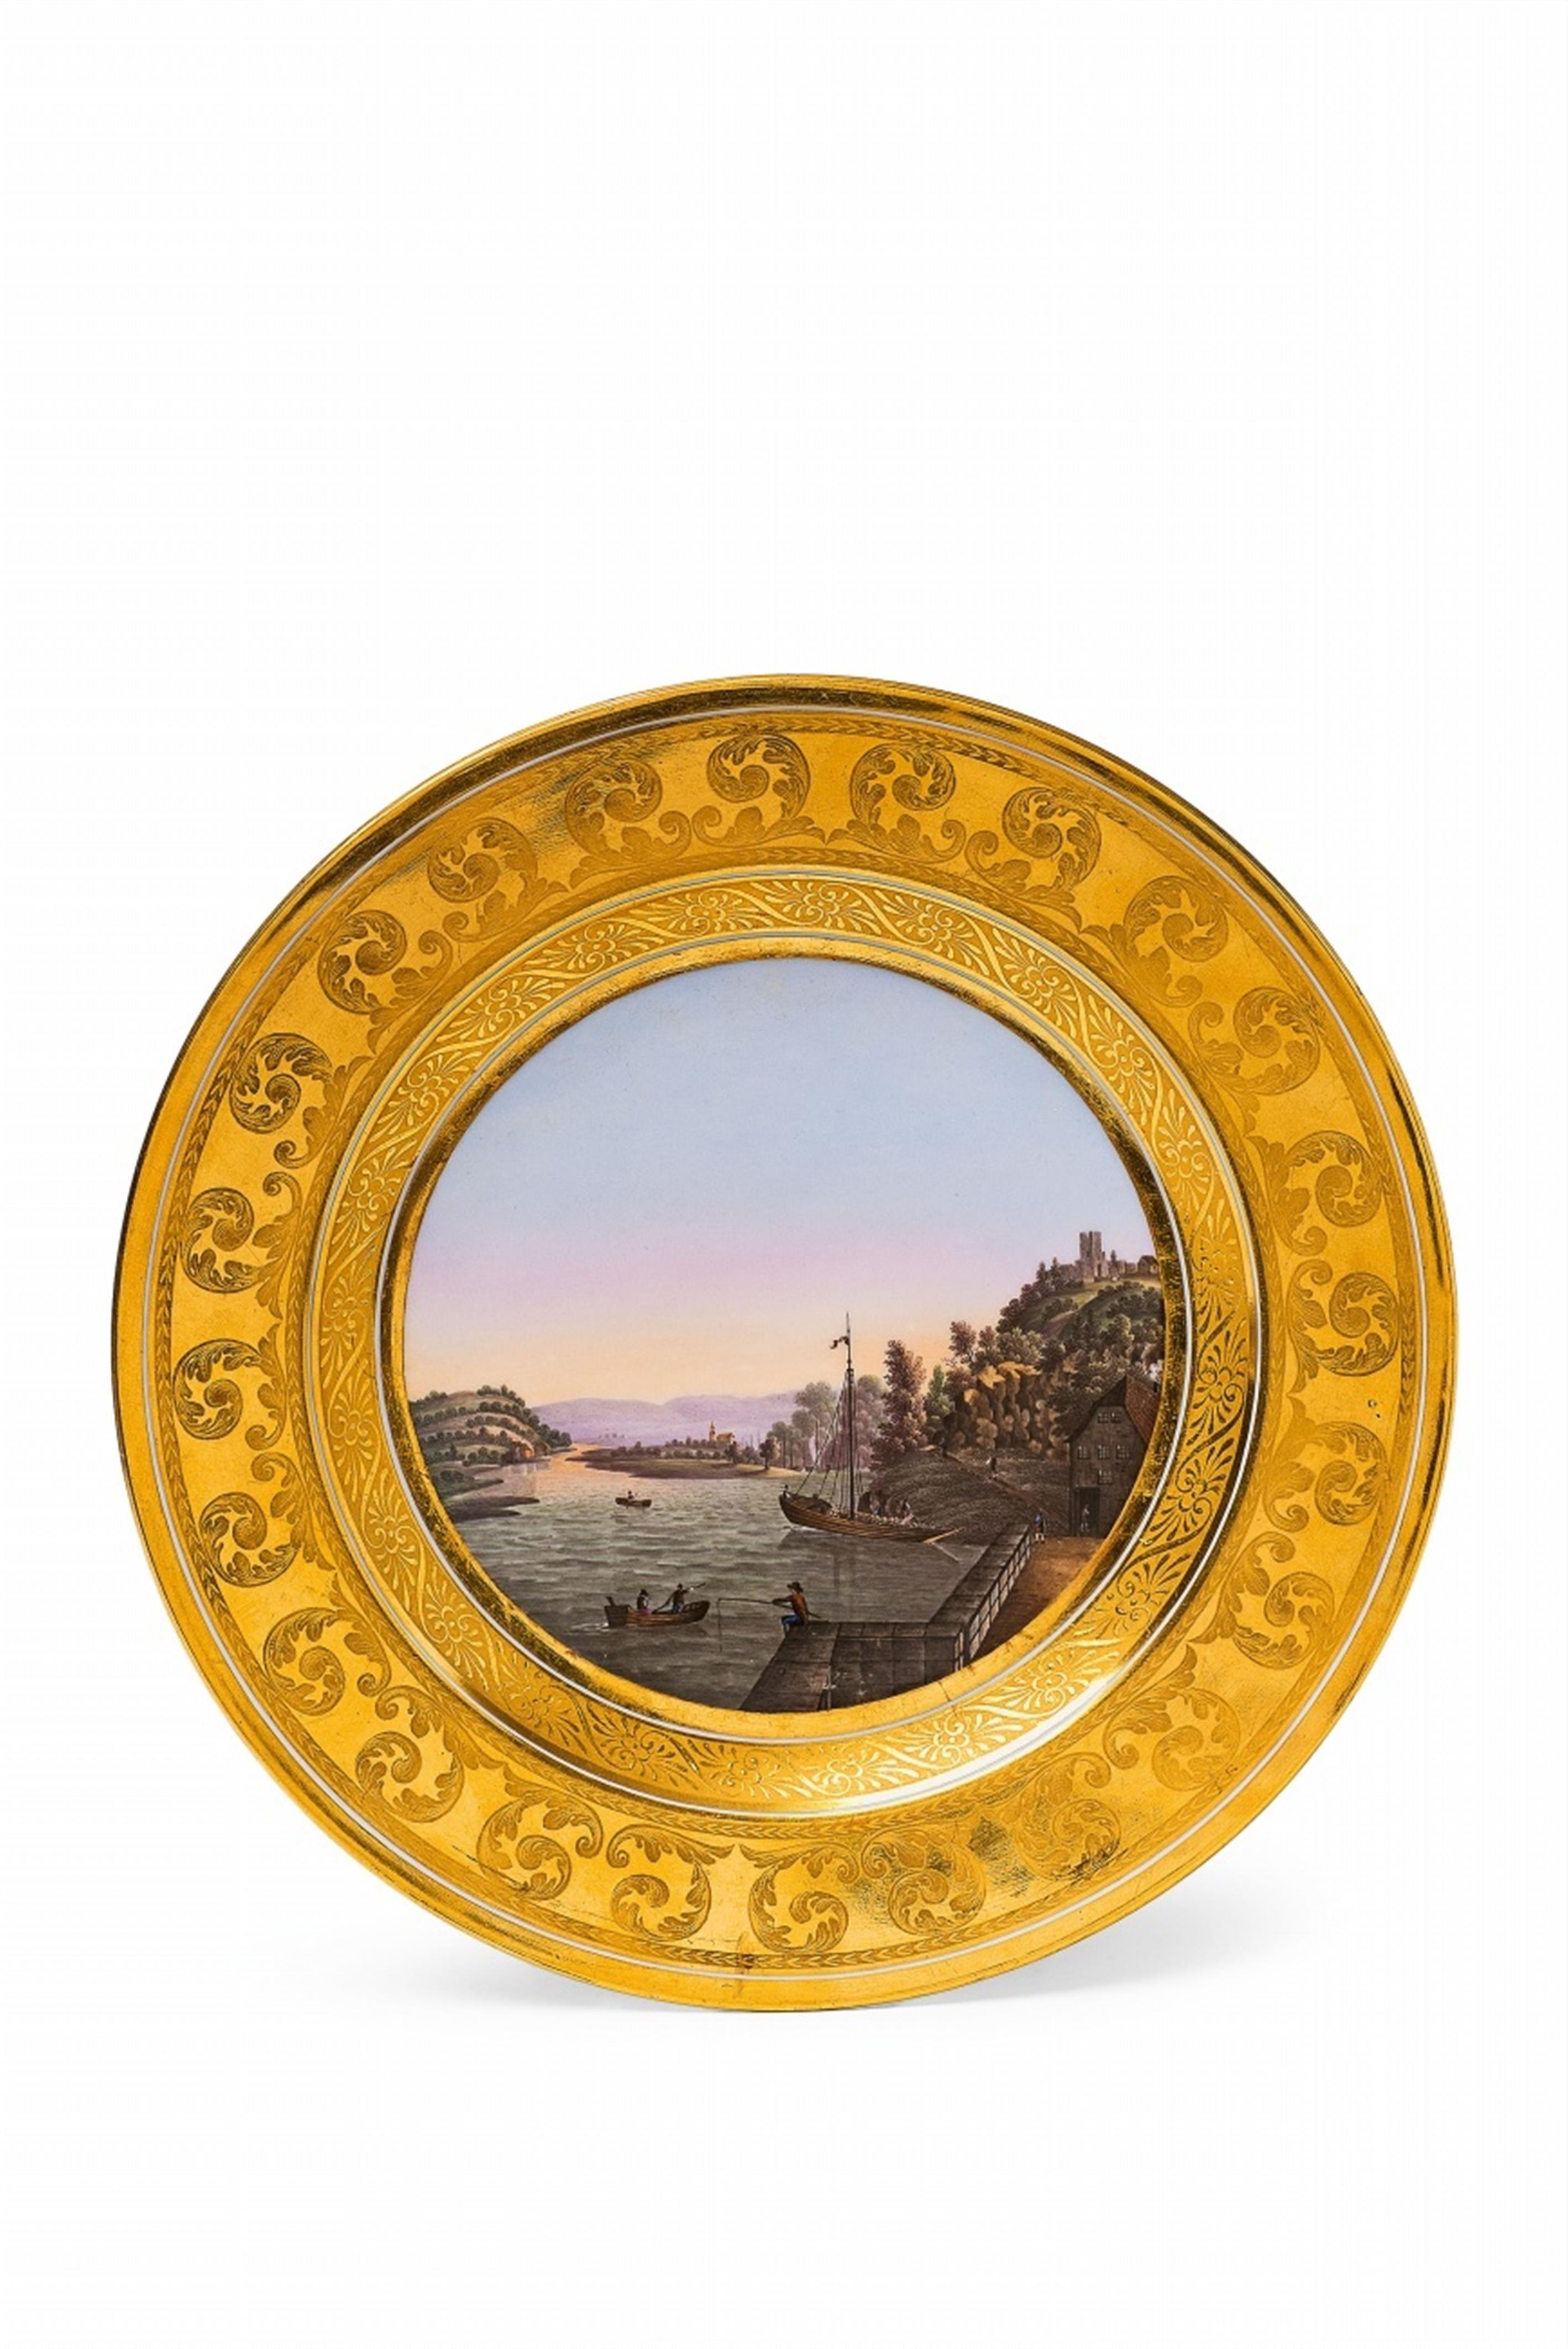 A Berlin KPM porcelain plate with a view of Blankenstein on the Ruhr - image-1